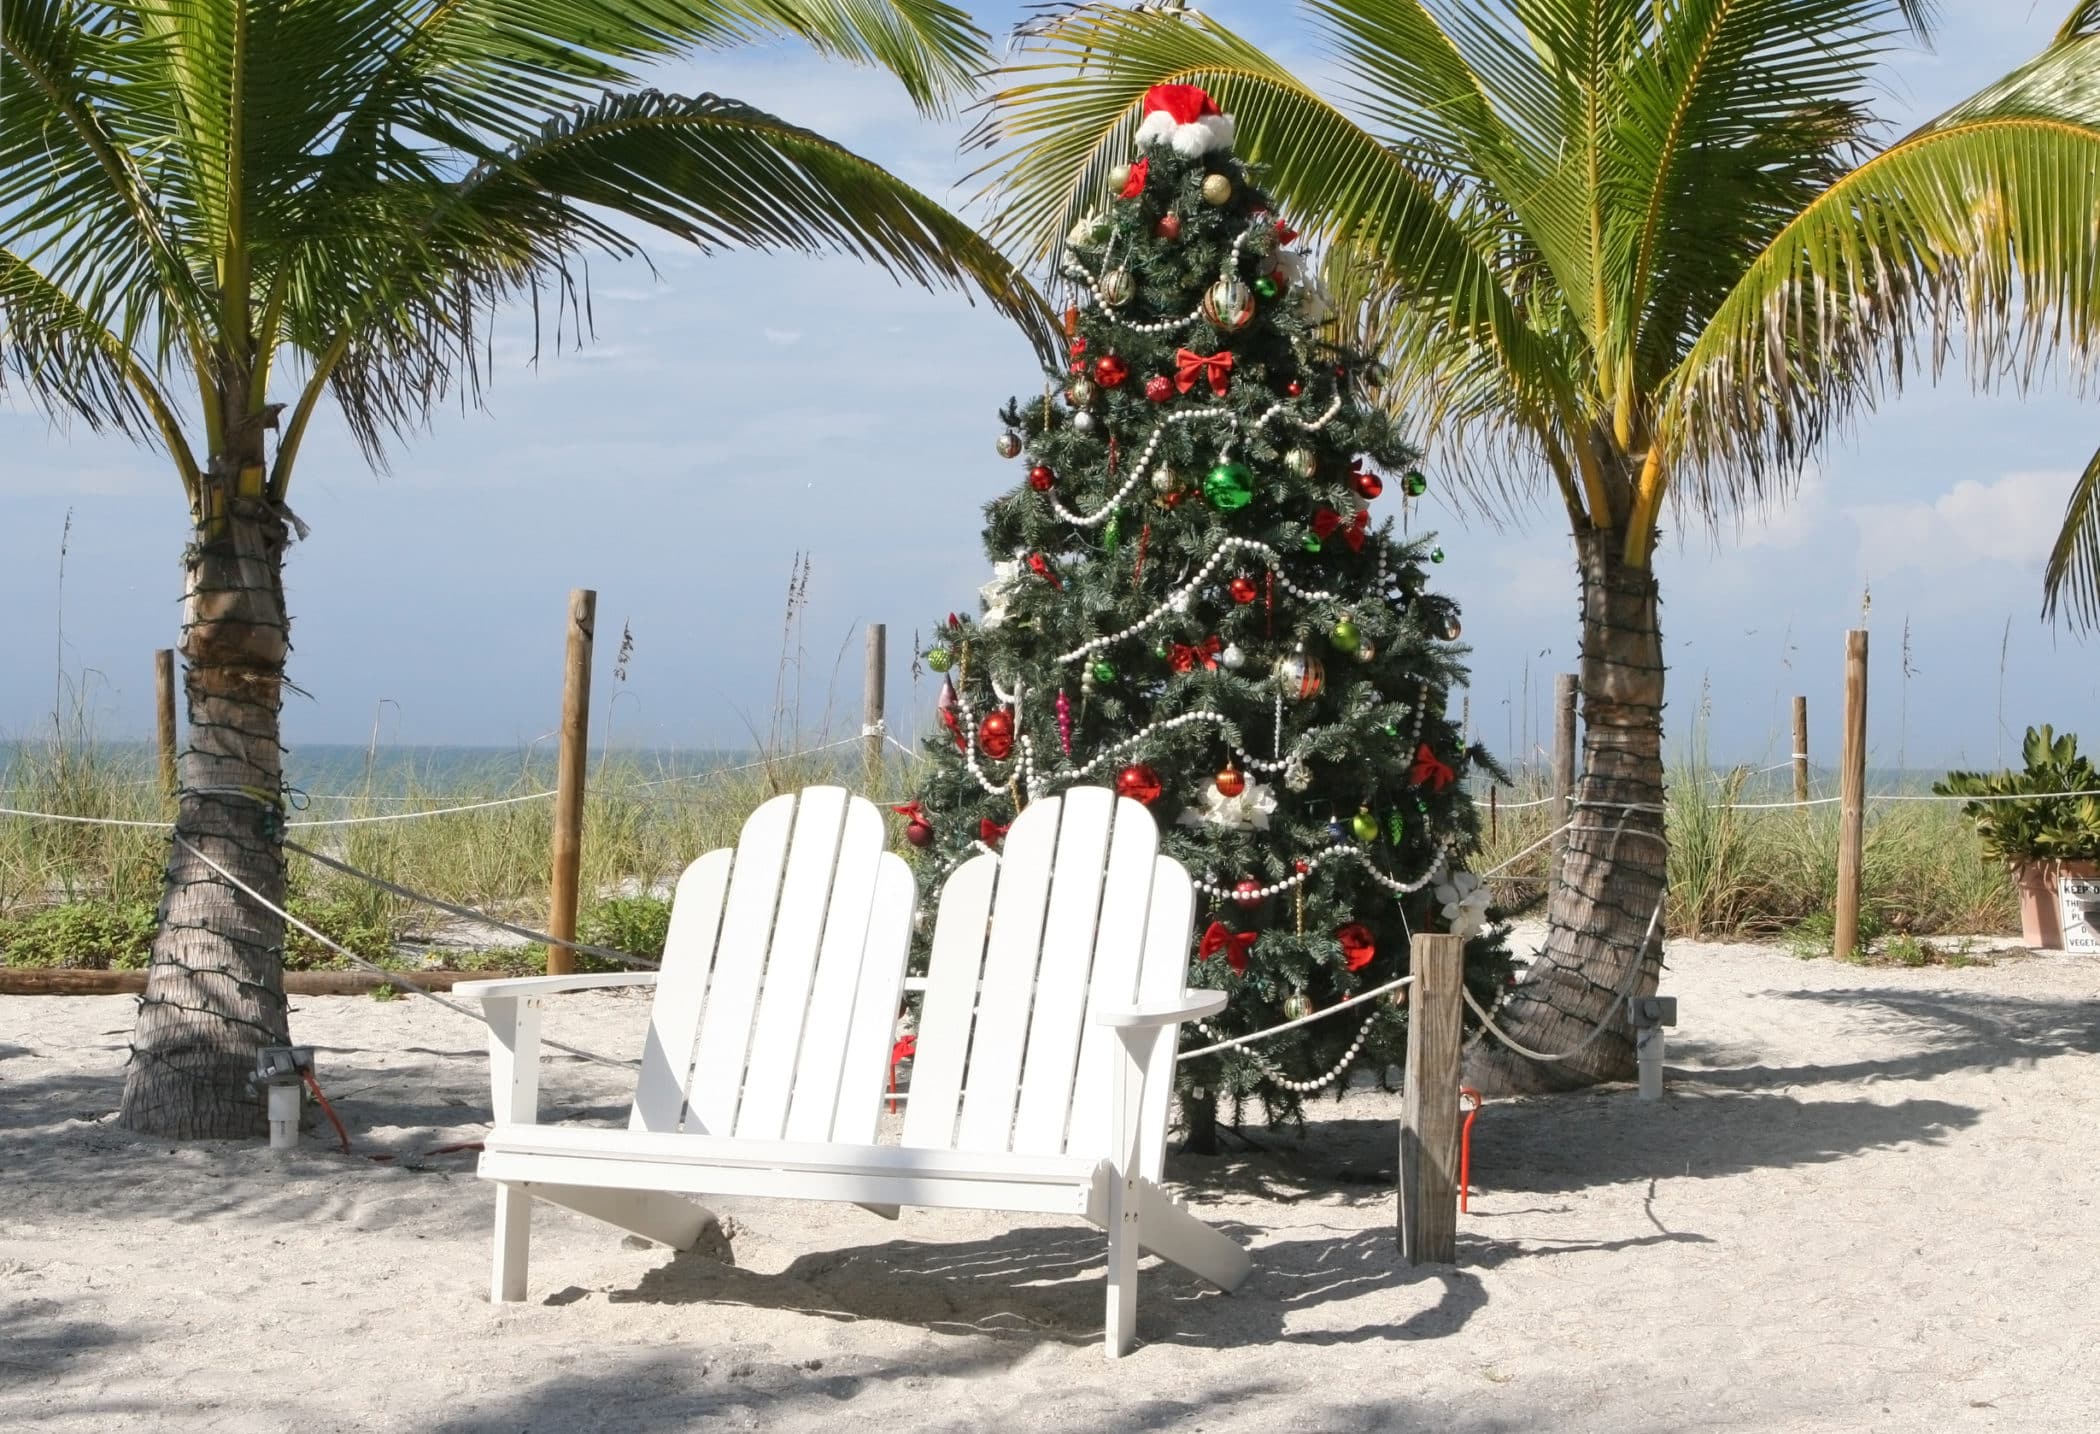 Christmas in Florida at the beach